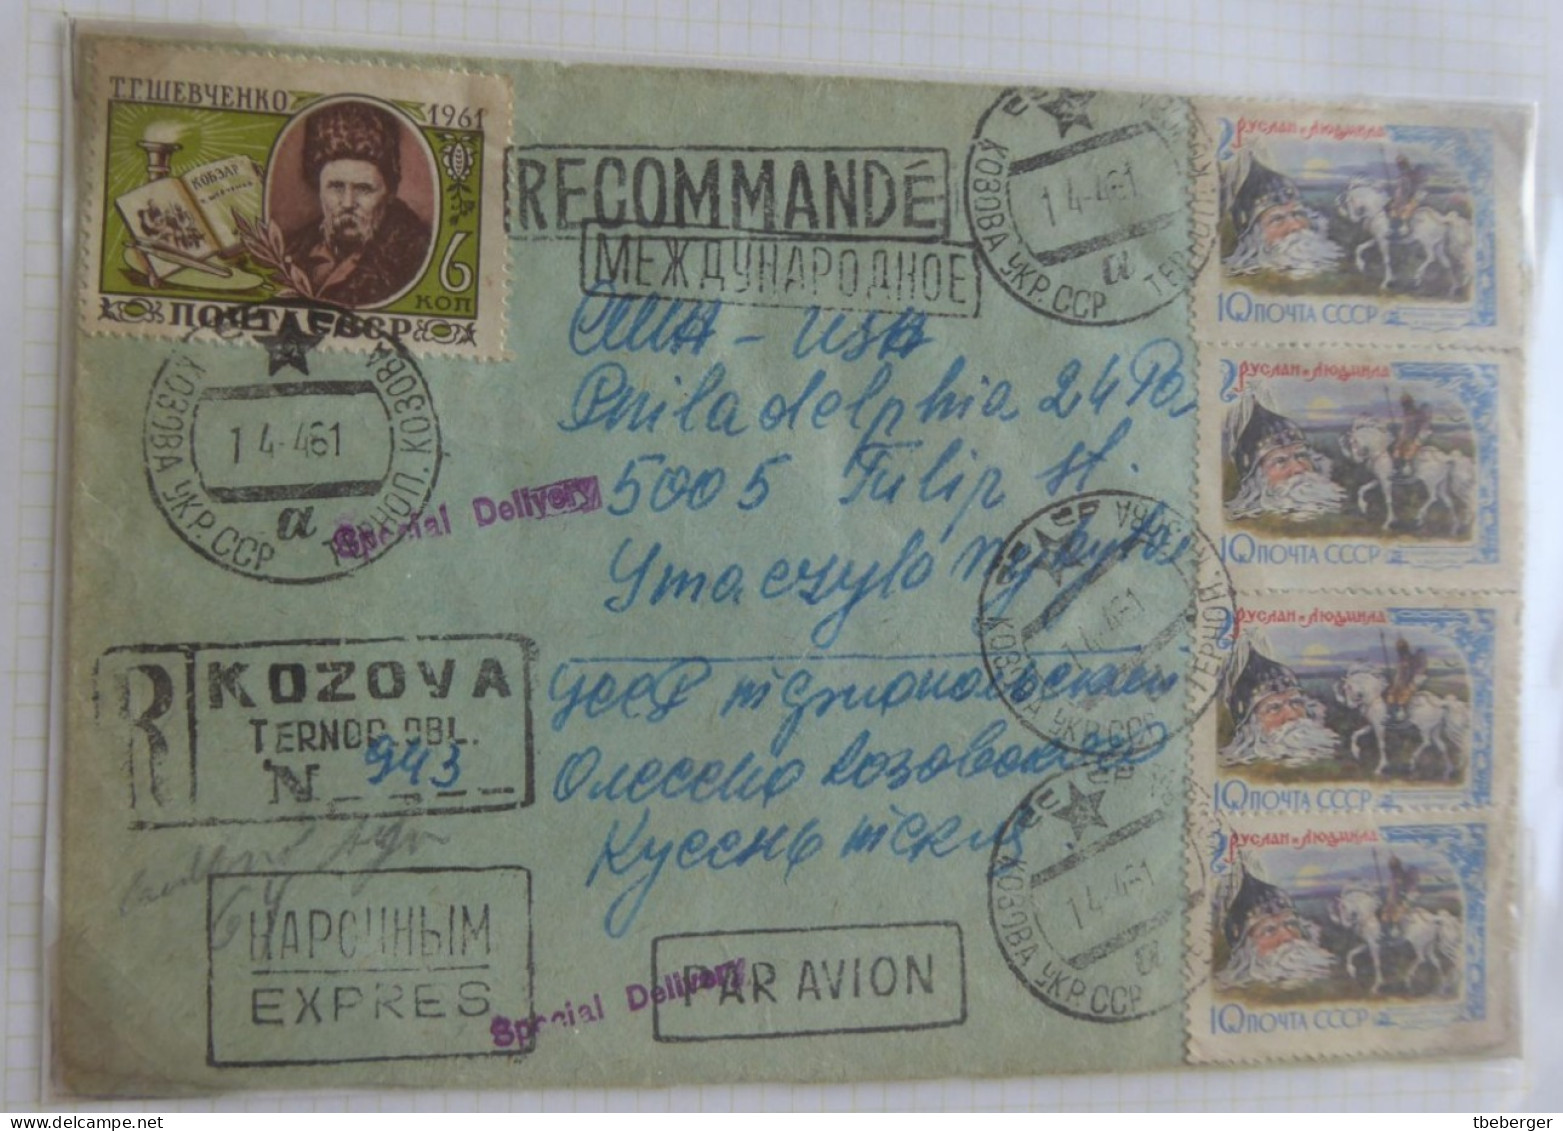 Russia USSR 1947-92 Special Post Express Mail, 15 covers with different labels, cds's & frankings ex collection Miskin